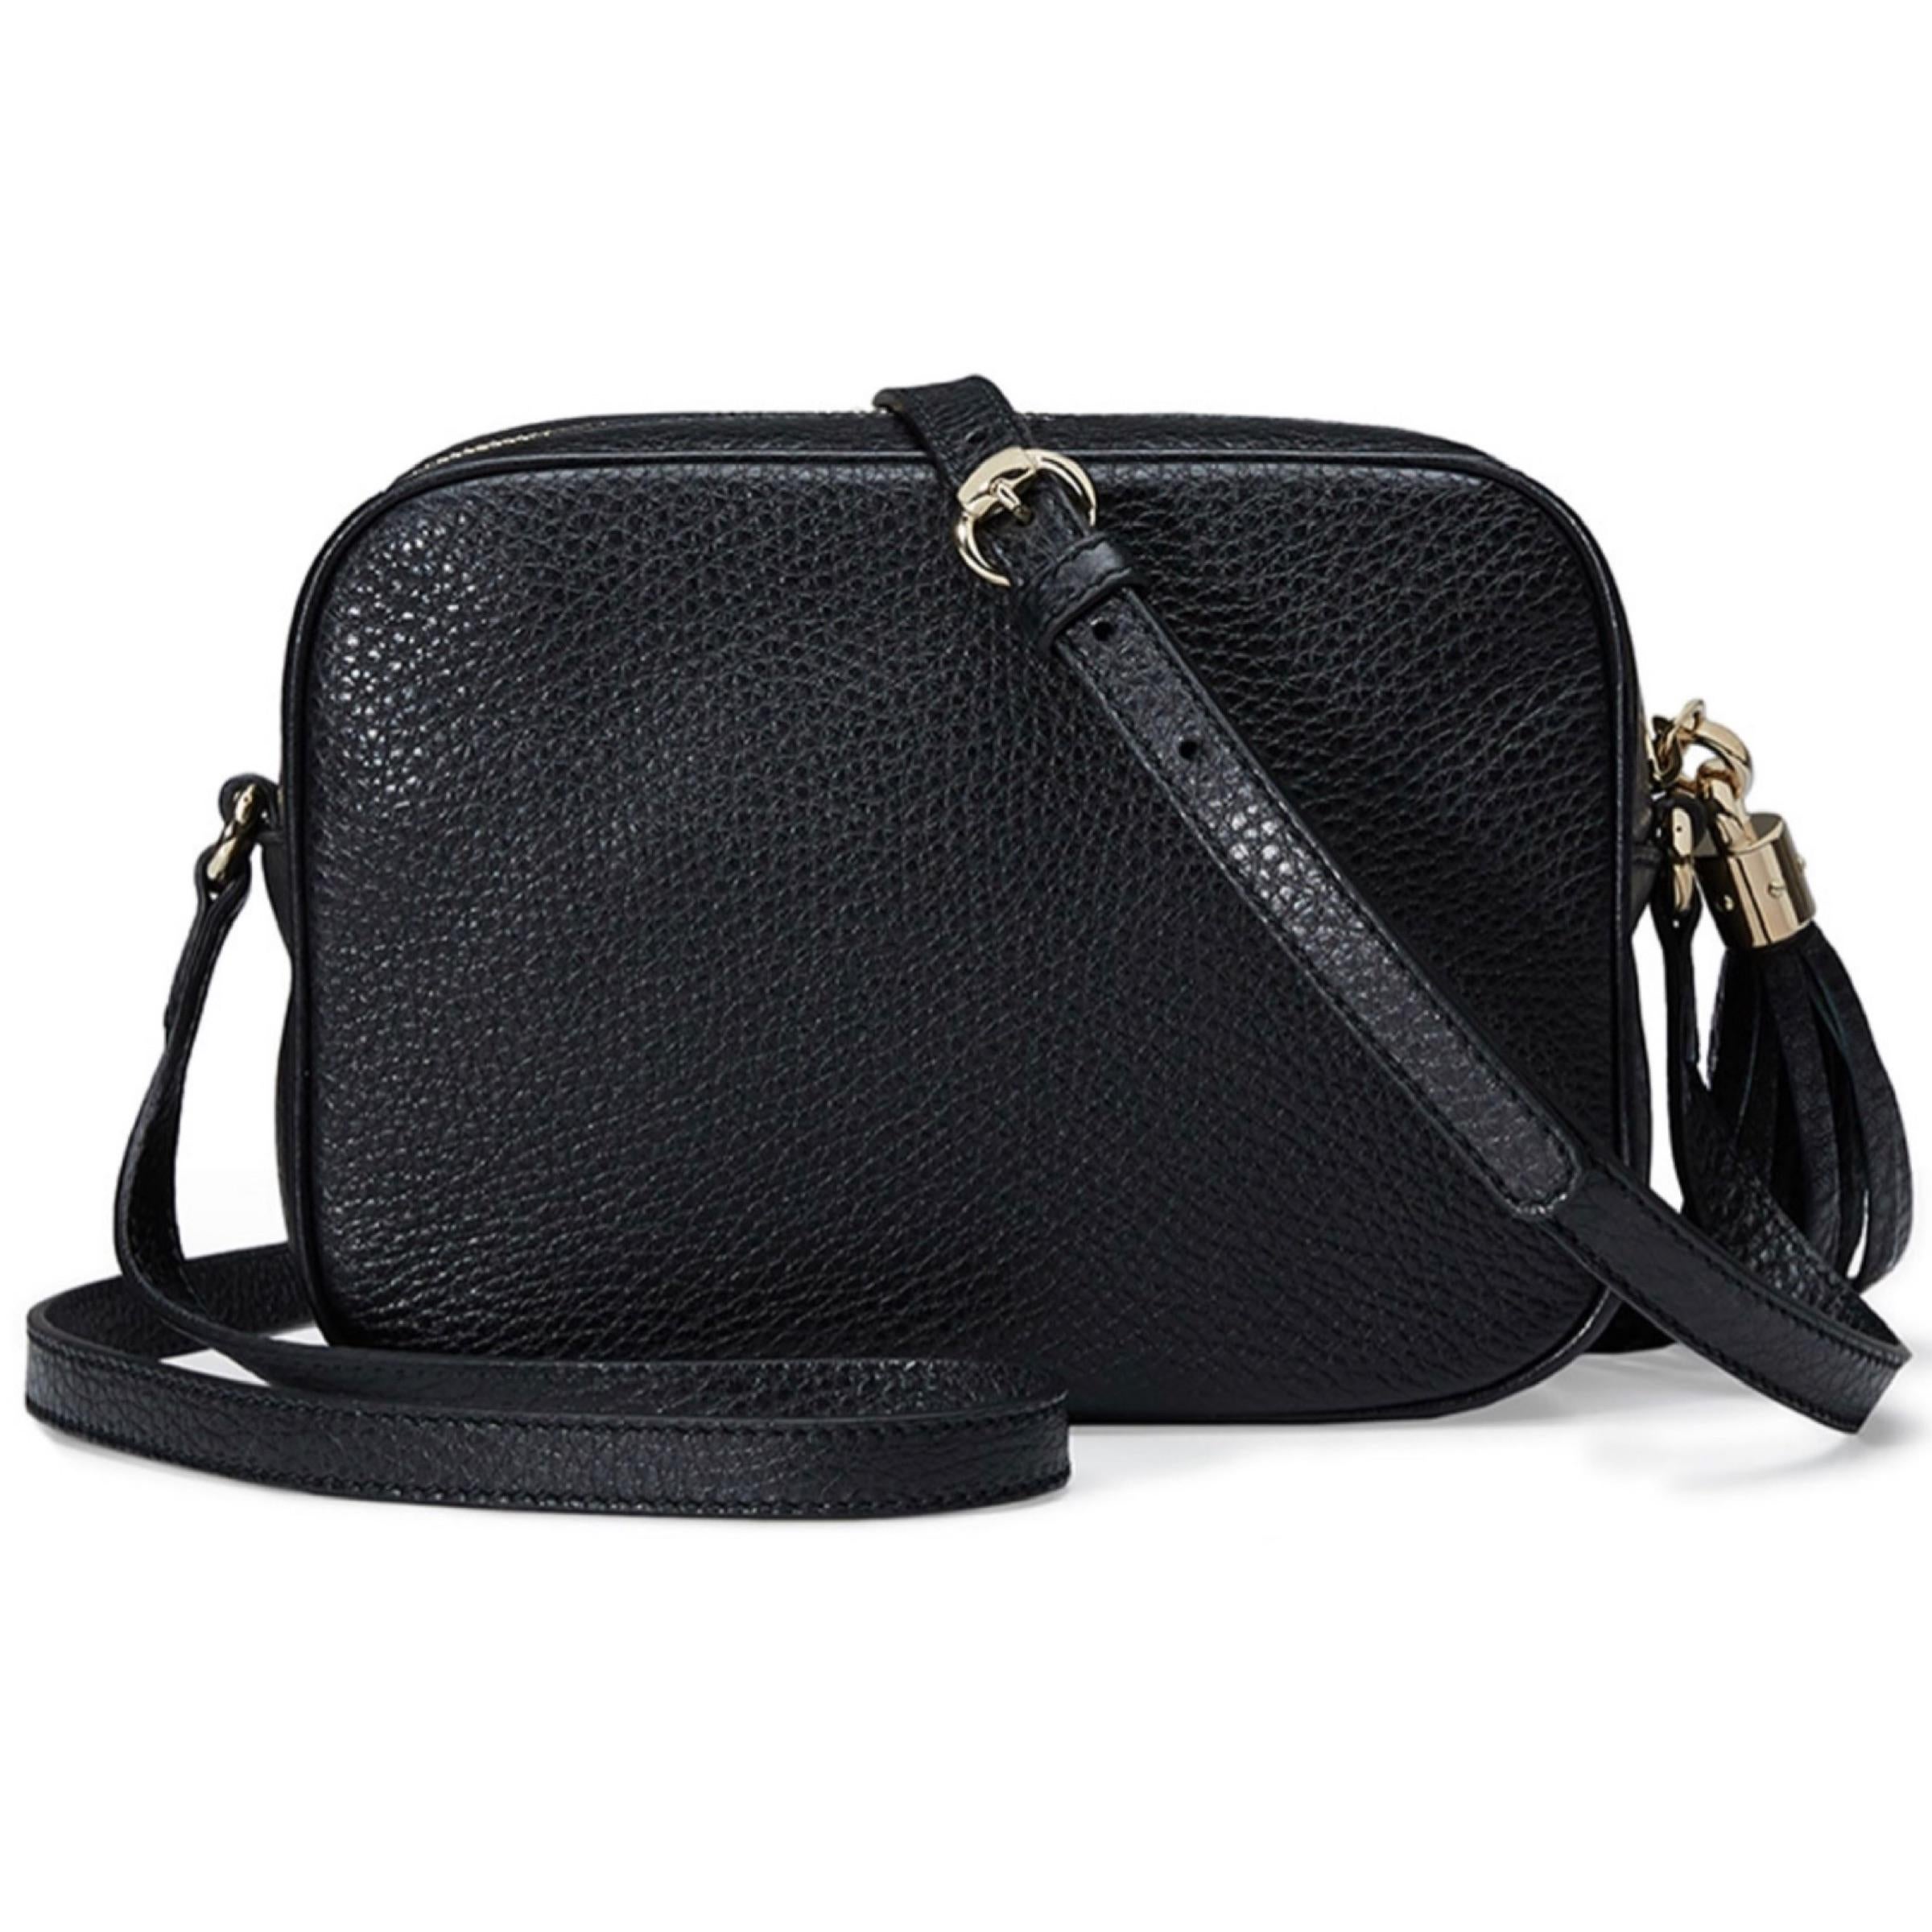 Women's NEW Gucci Black Small Soho Disco Leather Crossbody Bag For Sale